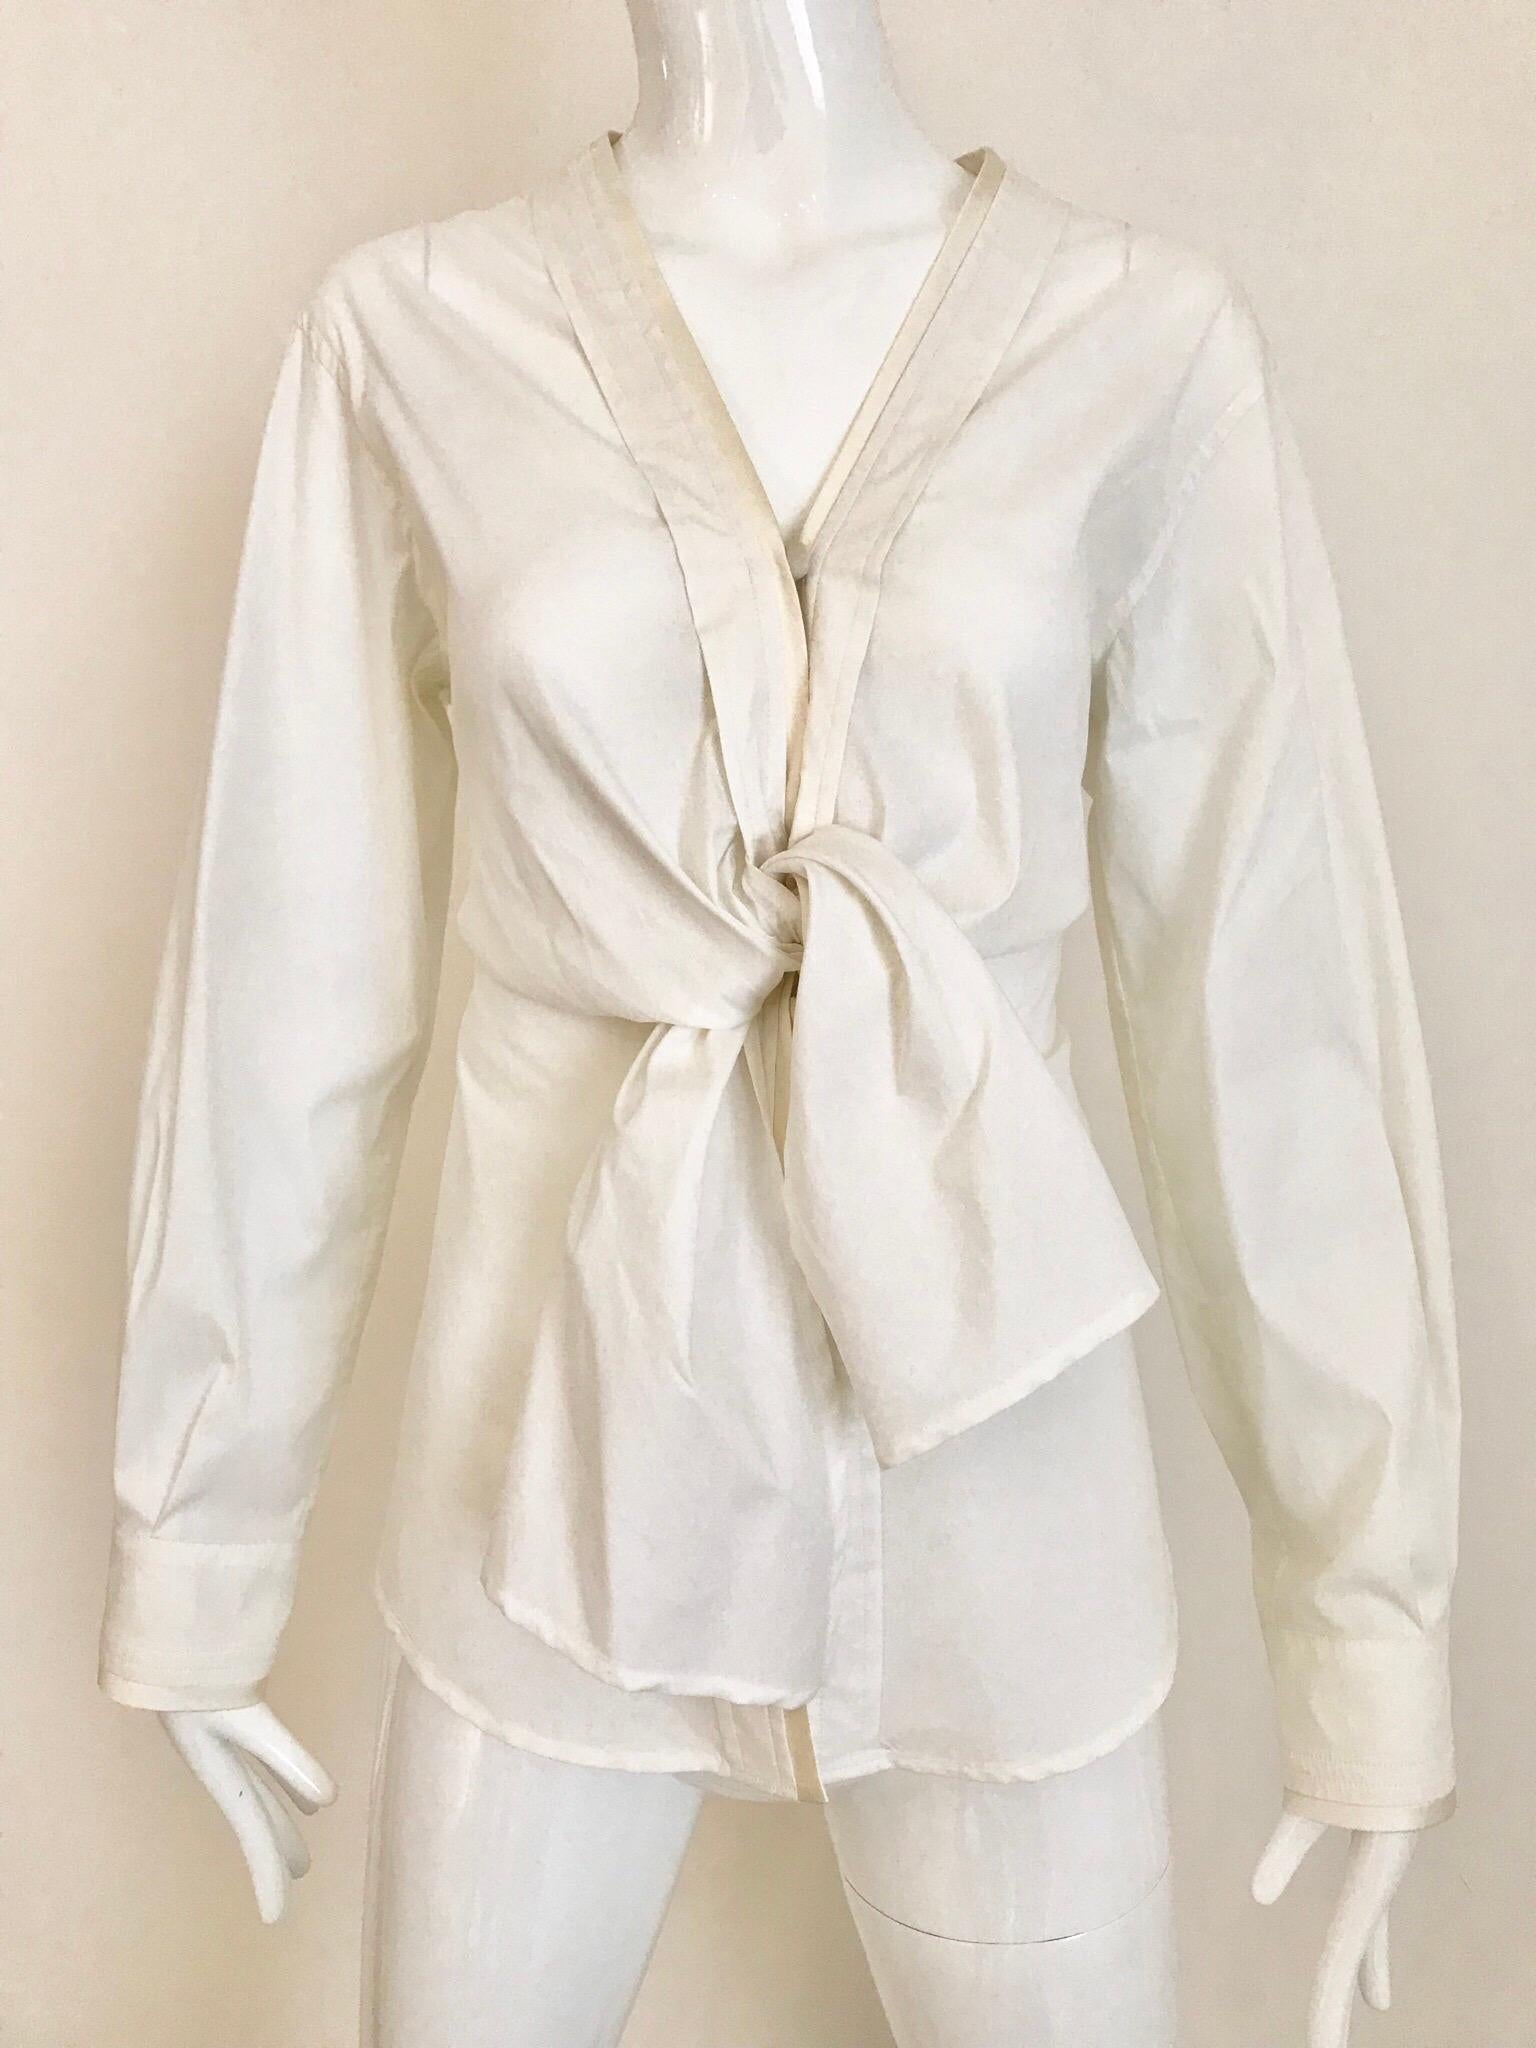 Yves Saint Laurent by Tom Ford  White Cotton Tie Front Blouse For Sale 1